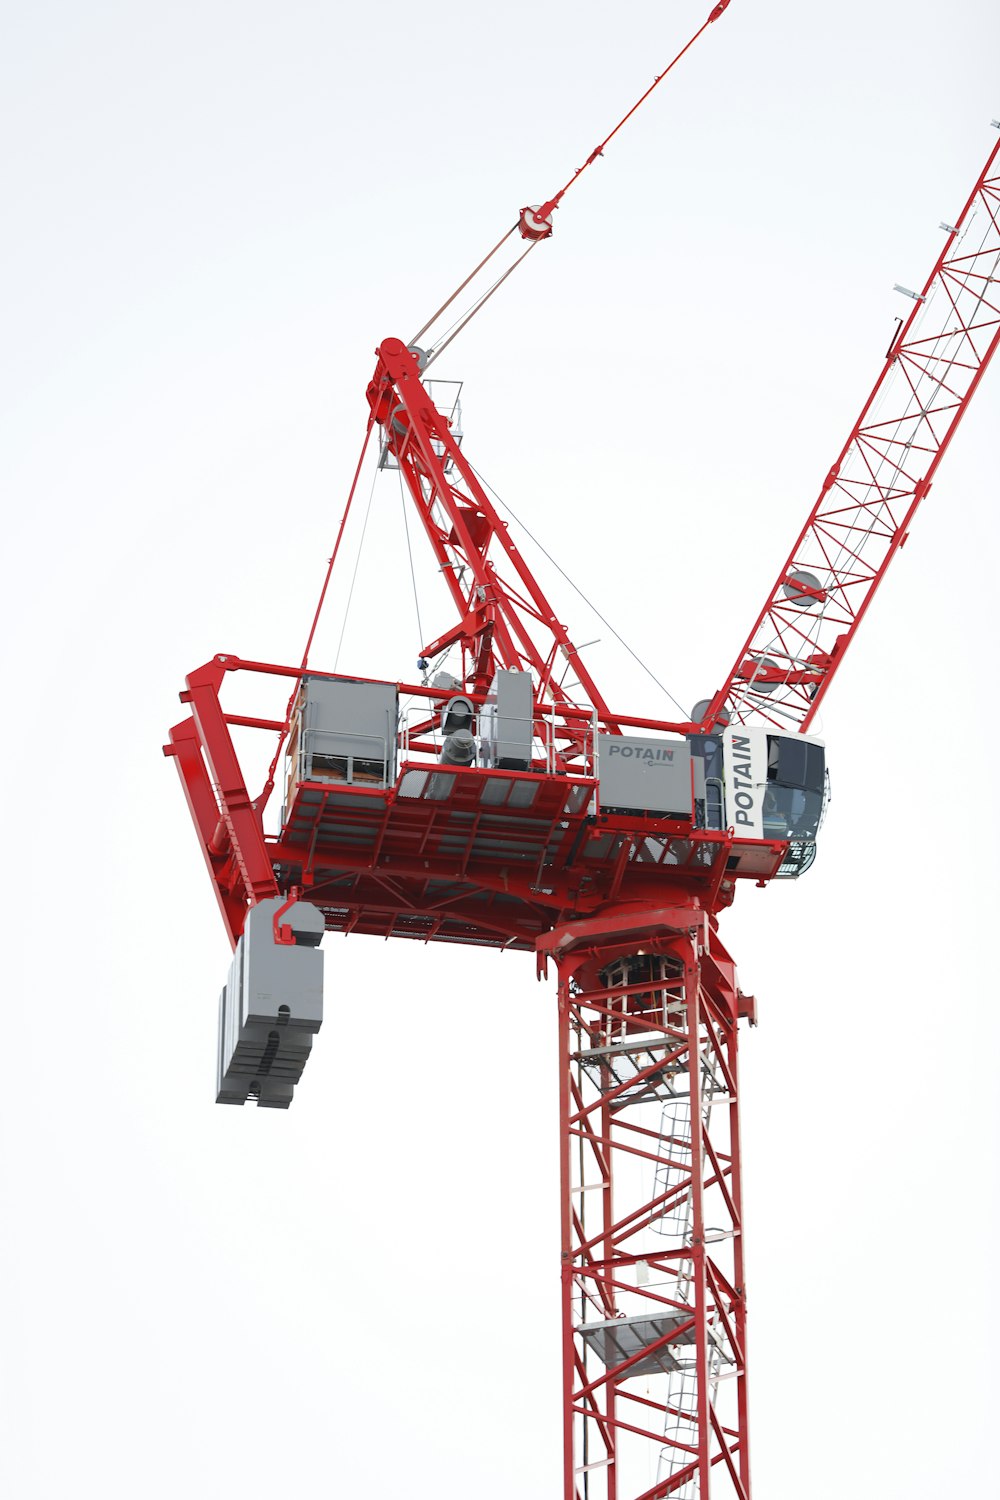 a large red crane is in the air